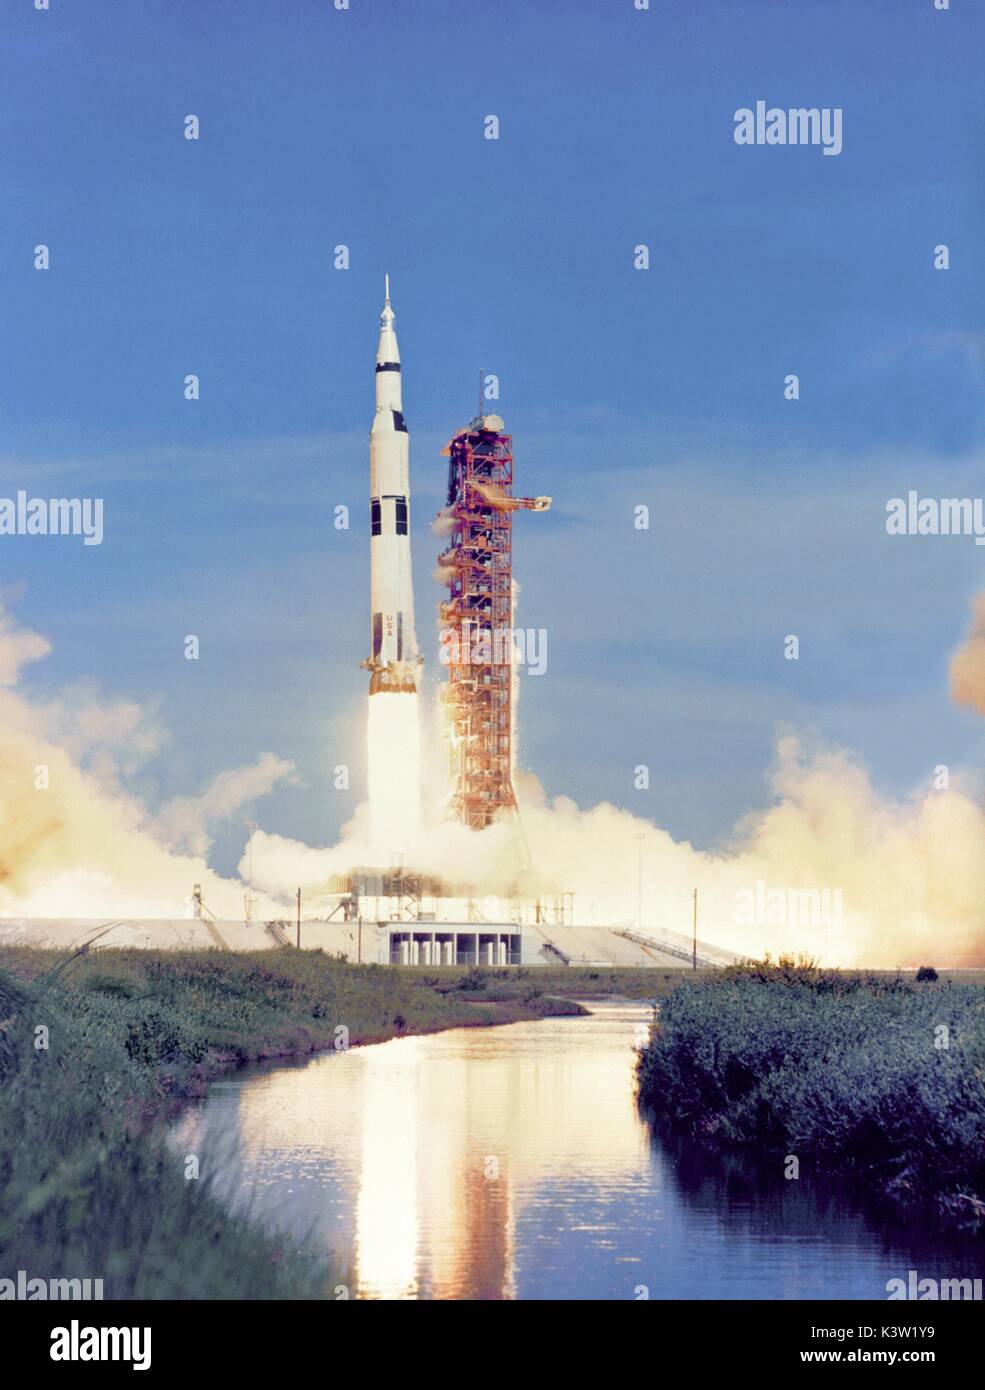 The NASA Apollo 15 lunar landing mission Saturn V rocket launches from the Kennedy Space Center Launch Complex 39 July 26, 1971 in Merritt Island, Florida.  (photo by NASA via Planetpix) Stock Photo